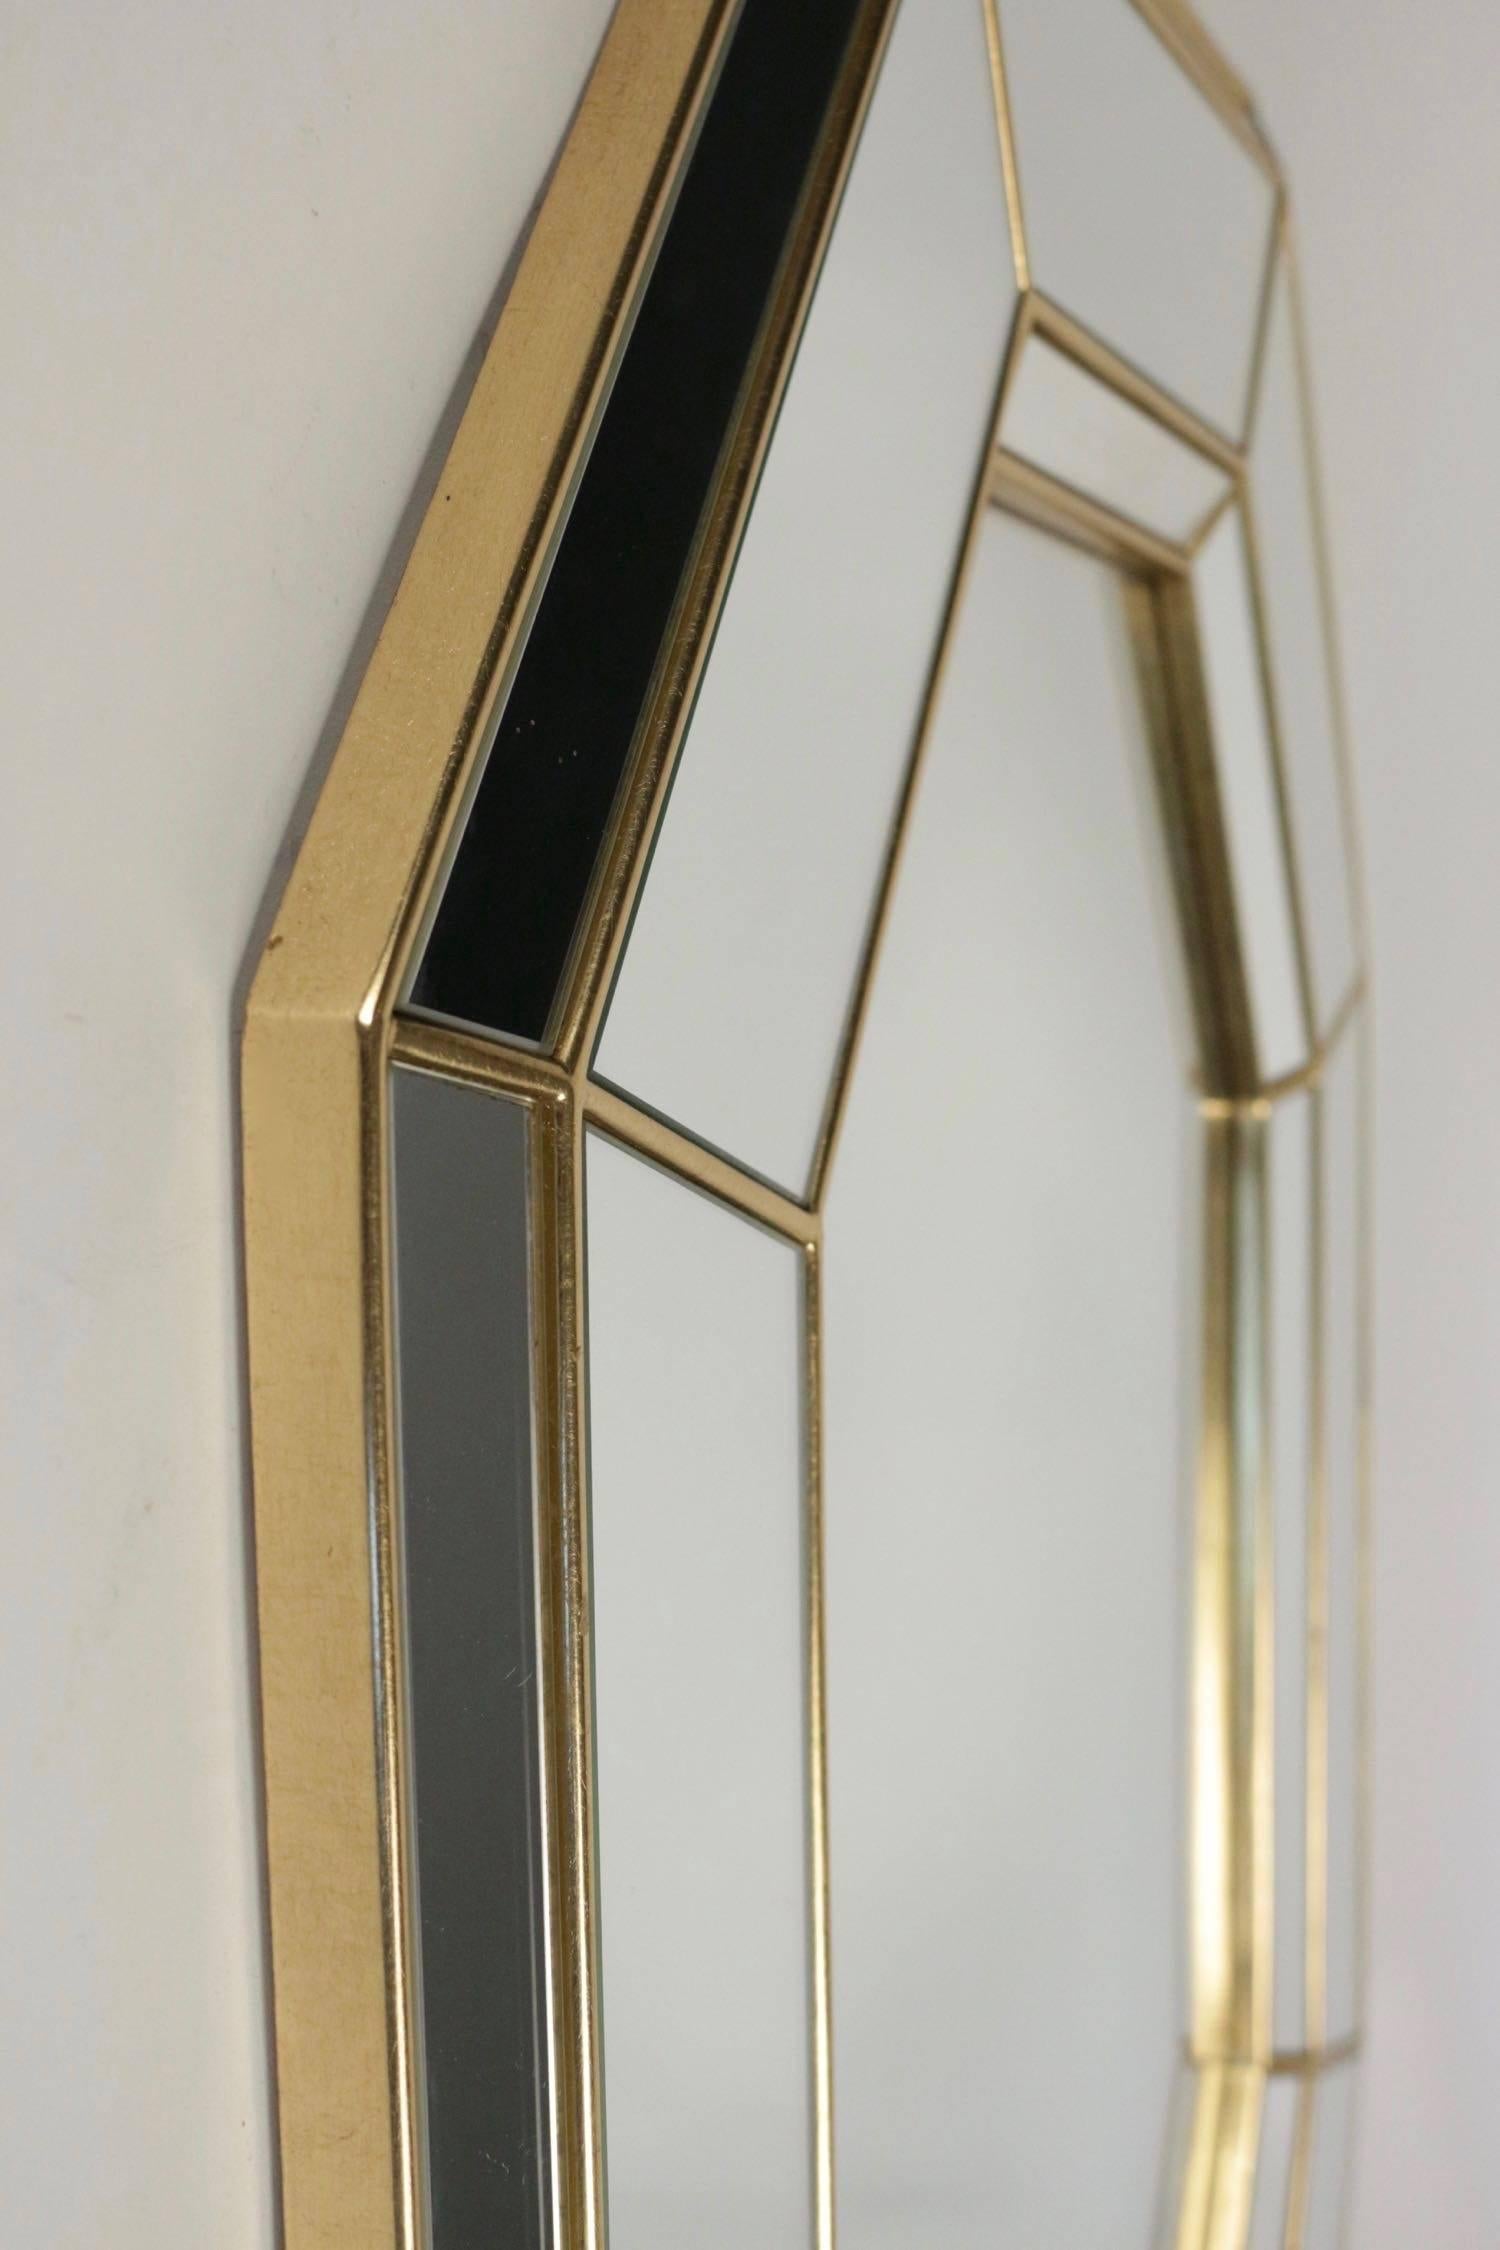 1960s cut edges mirror by Maison FlorArt.
The border of the mirror consists of eight mirror sections, with matching inside and outside mirror cuts. The set is assembled and underlined by thin giltwood sticks. In the center an eight cut edges mirror.